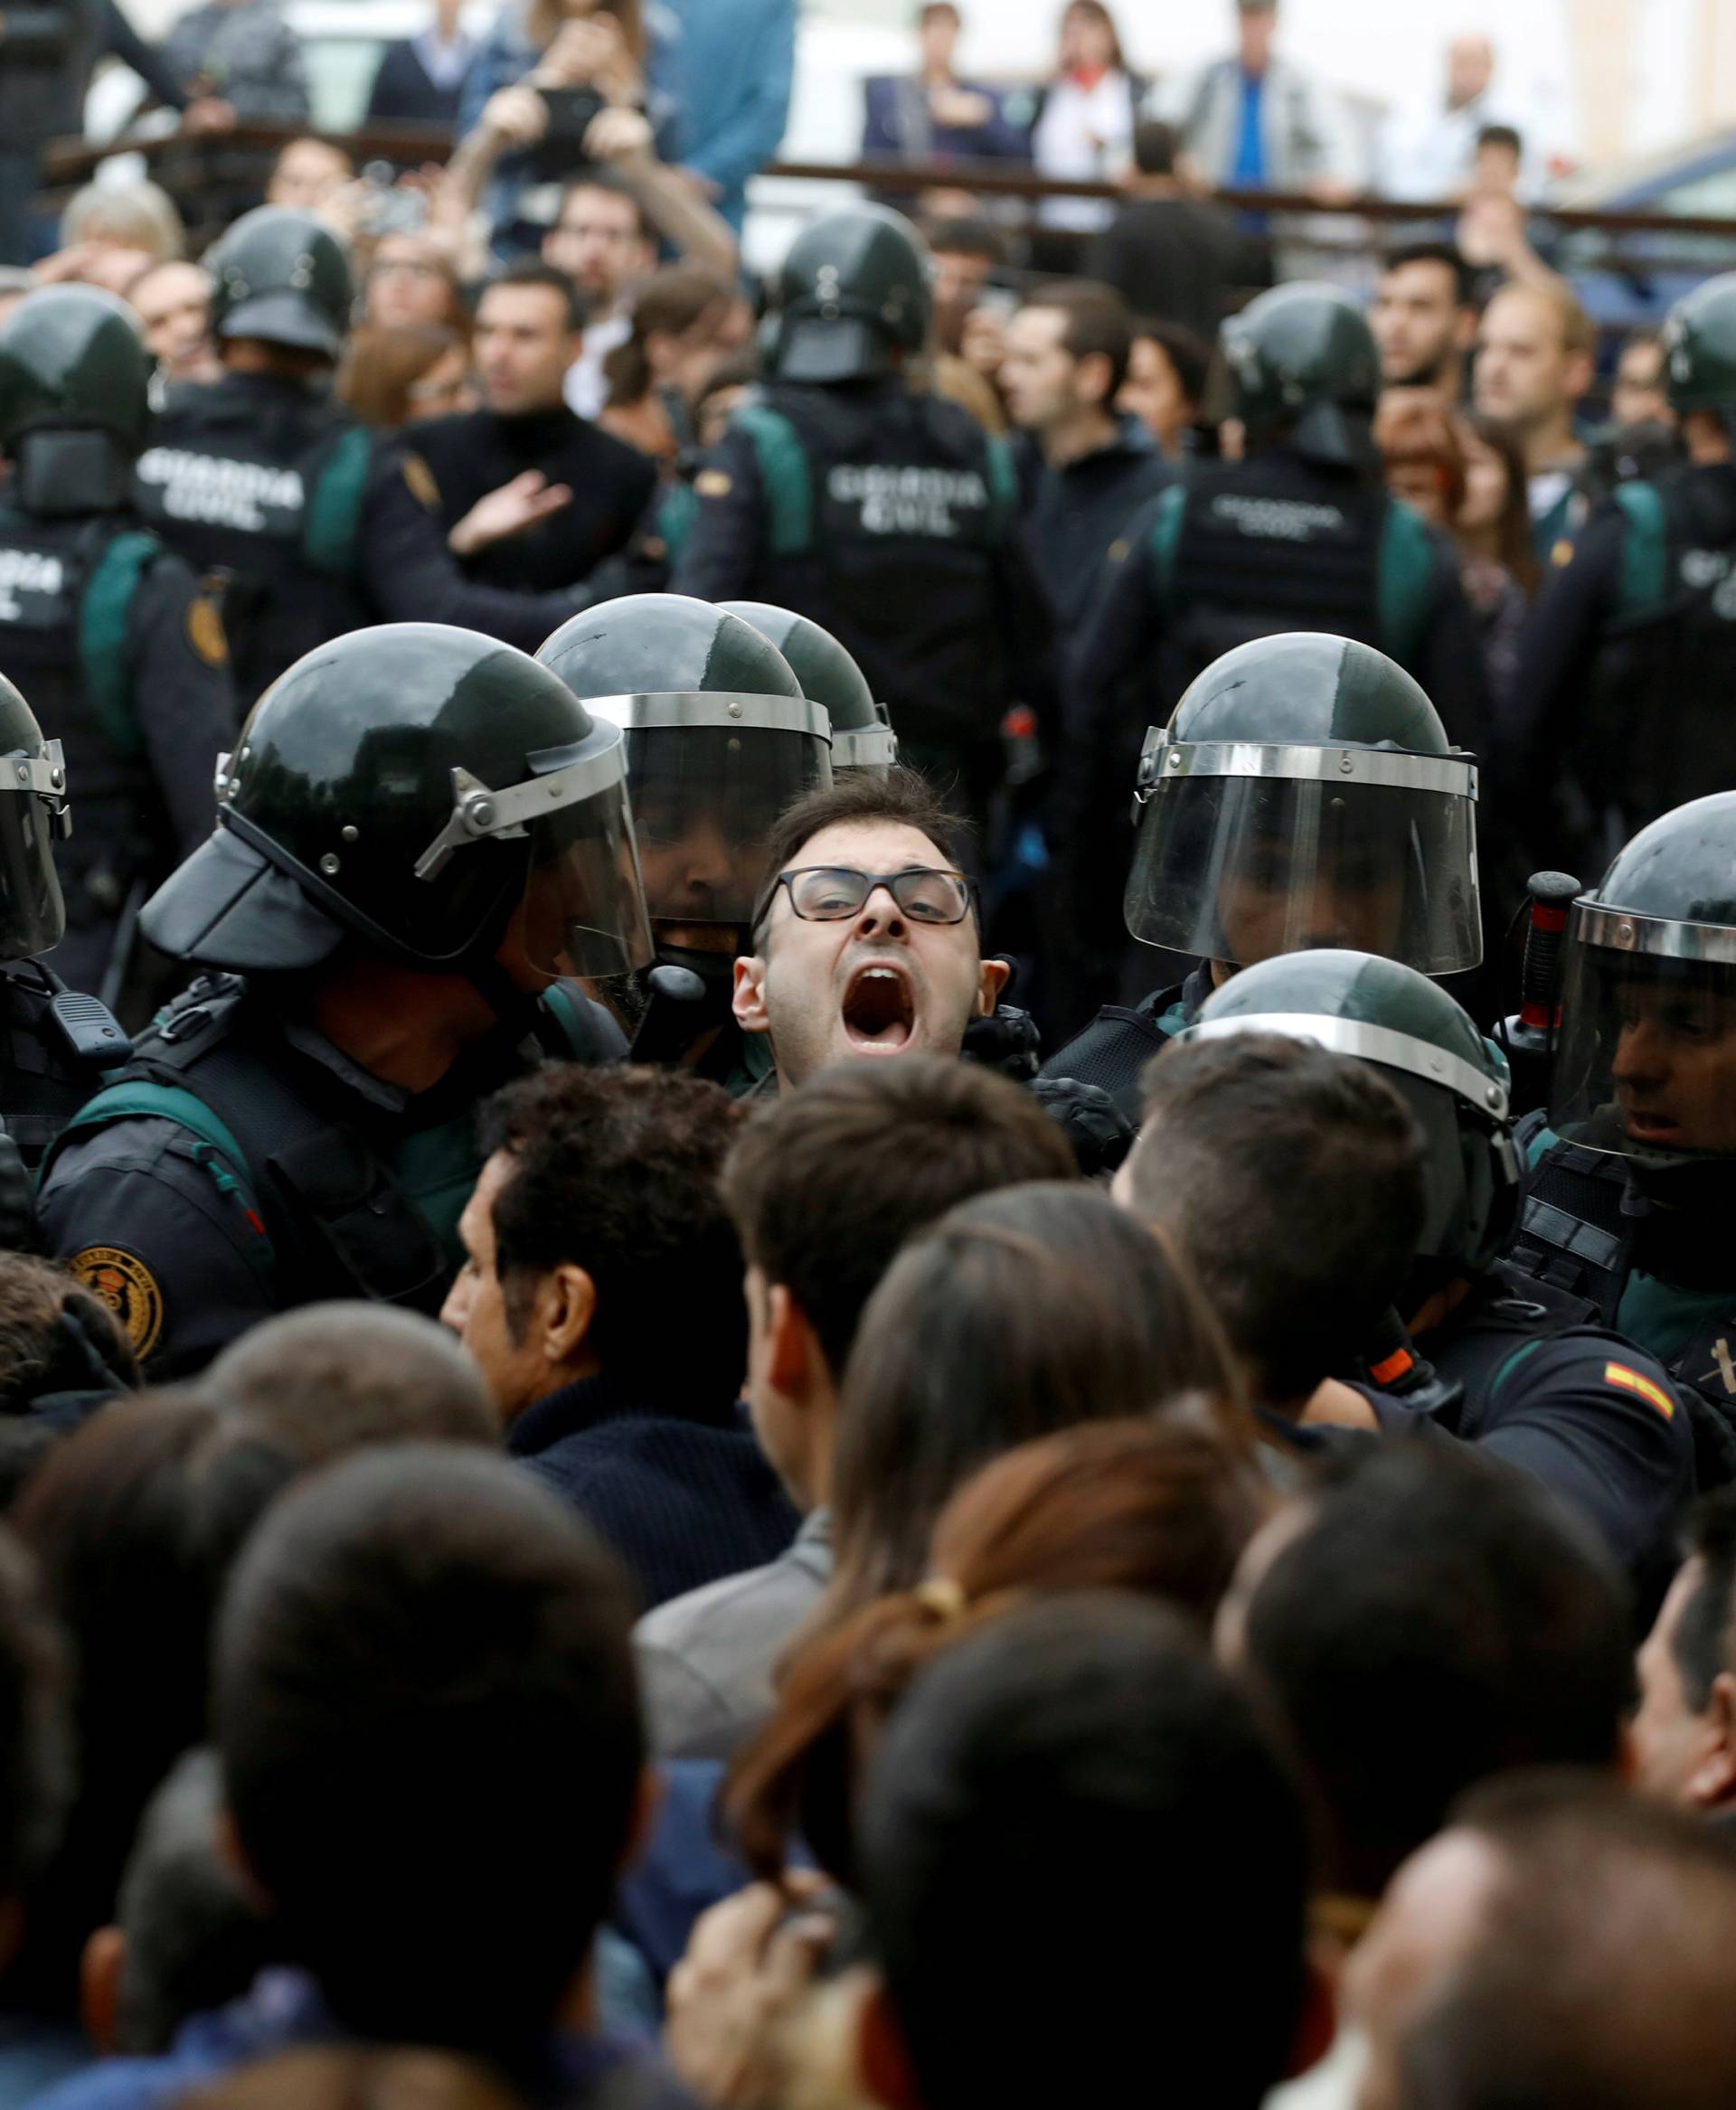 Scuffles break out as Spanish Civil Guard officers force their way through a crowd and into a polling station for the banned independence referendum in Sant Julia de Ramis